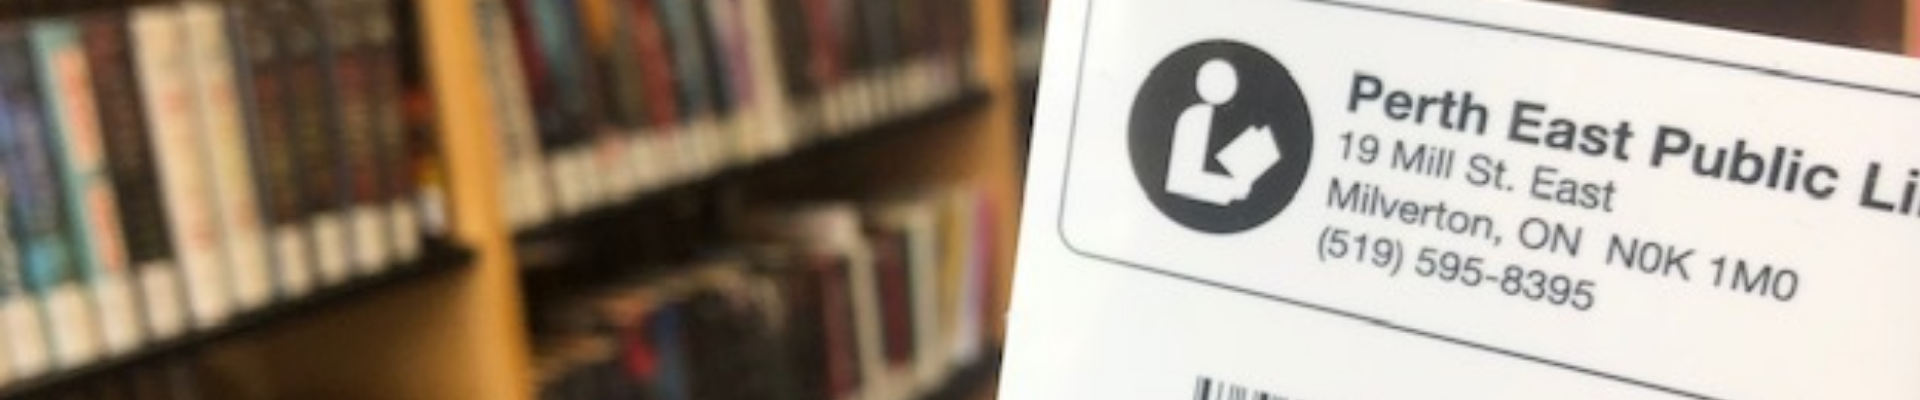 Library card banner image